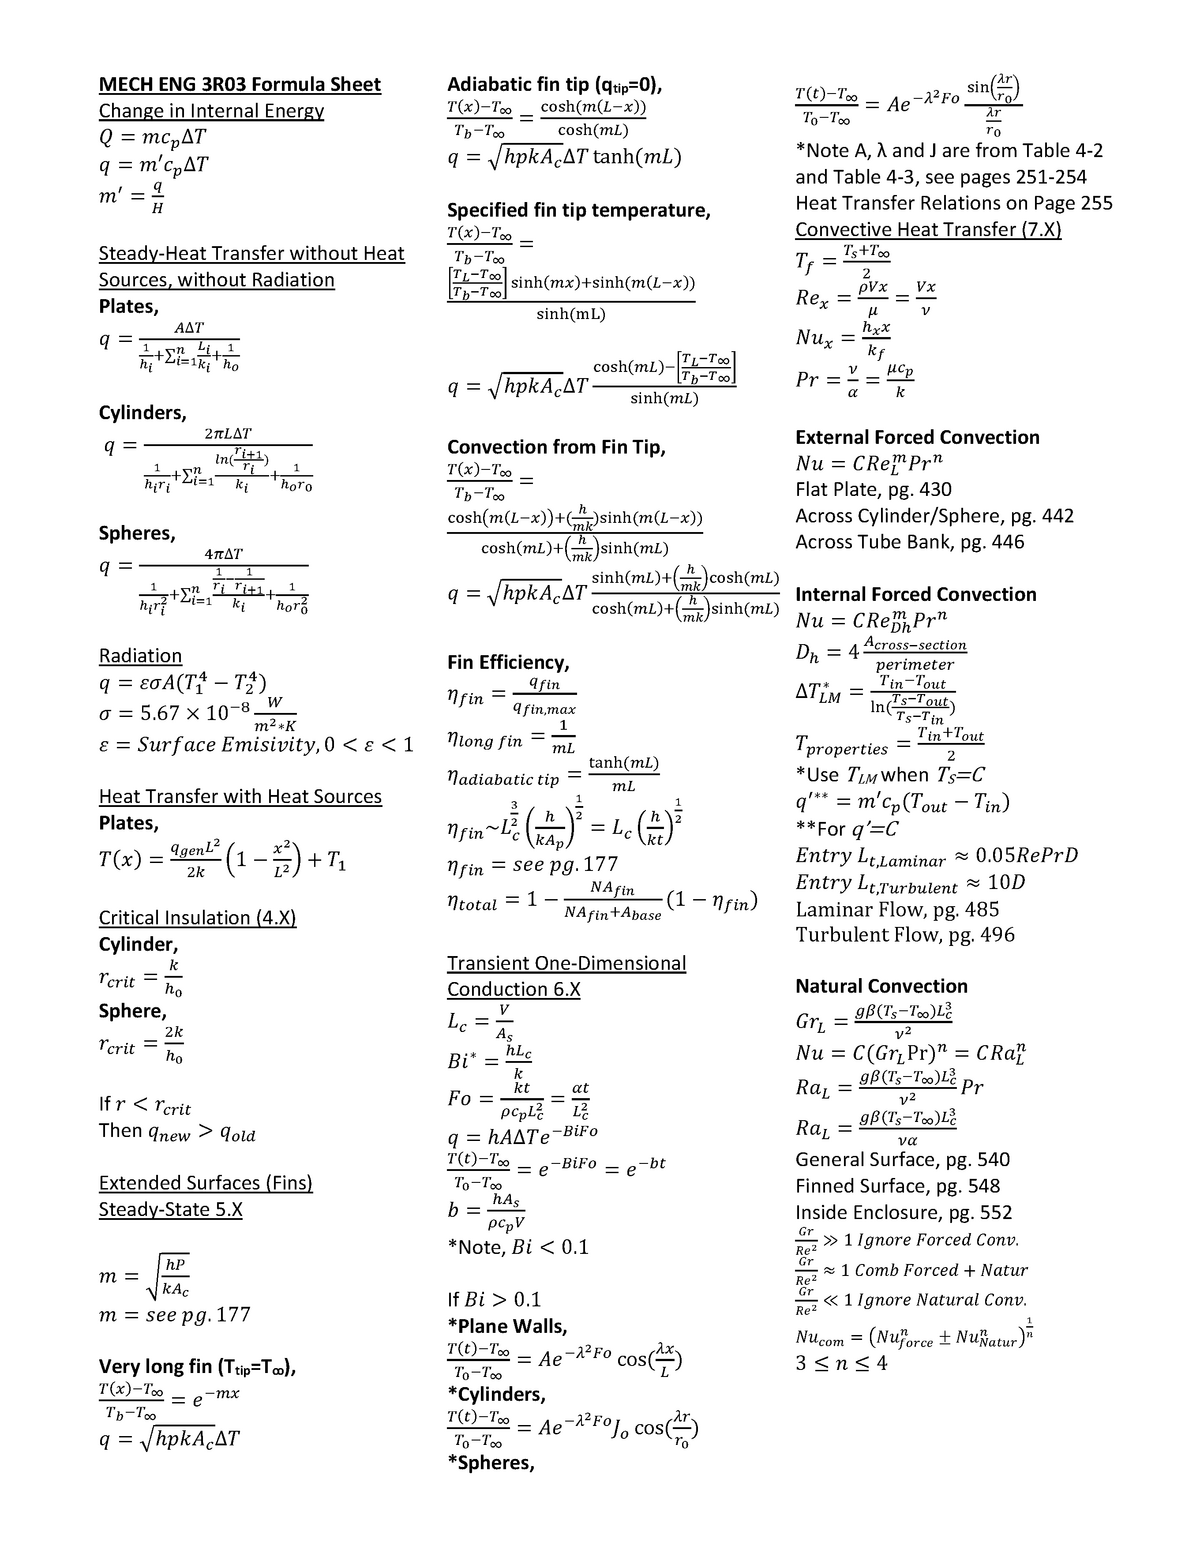 MECH ENG 3R03 Formula Sheet - MECH ENG 3R03 Formula Sheet Change in ...